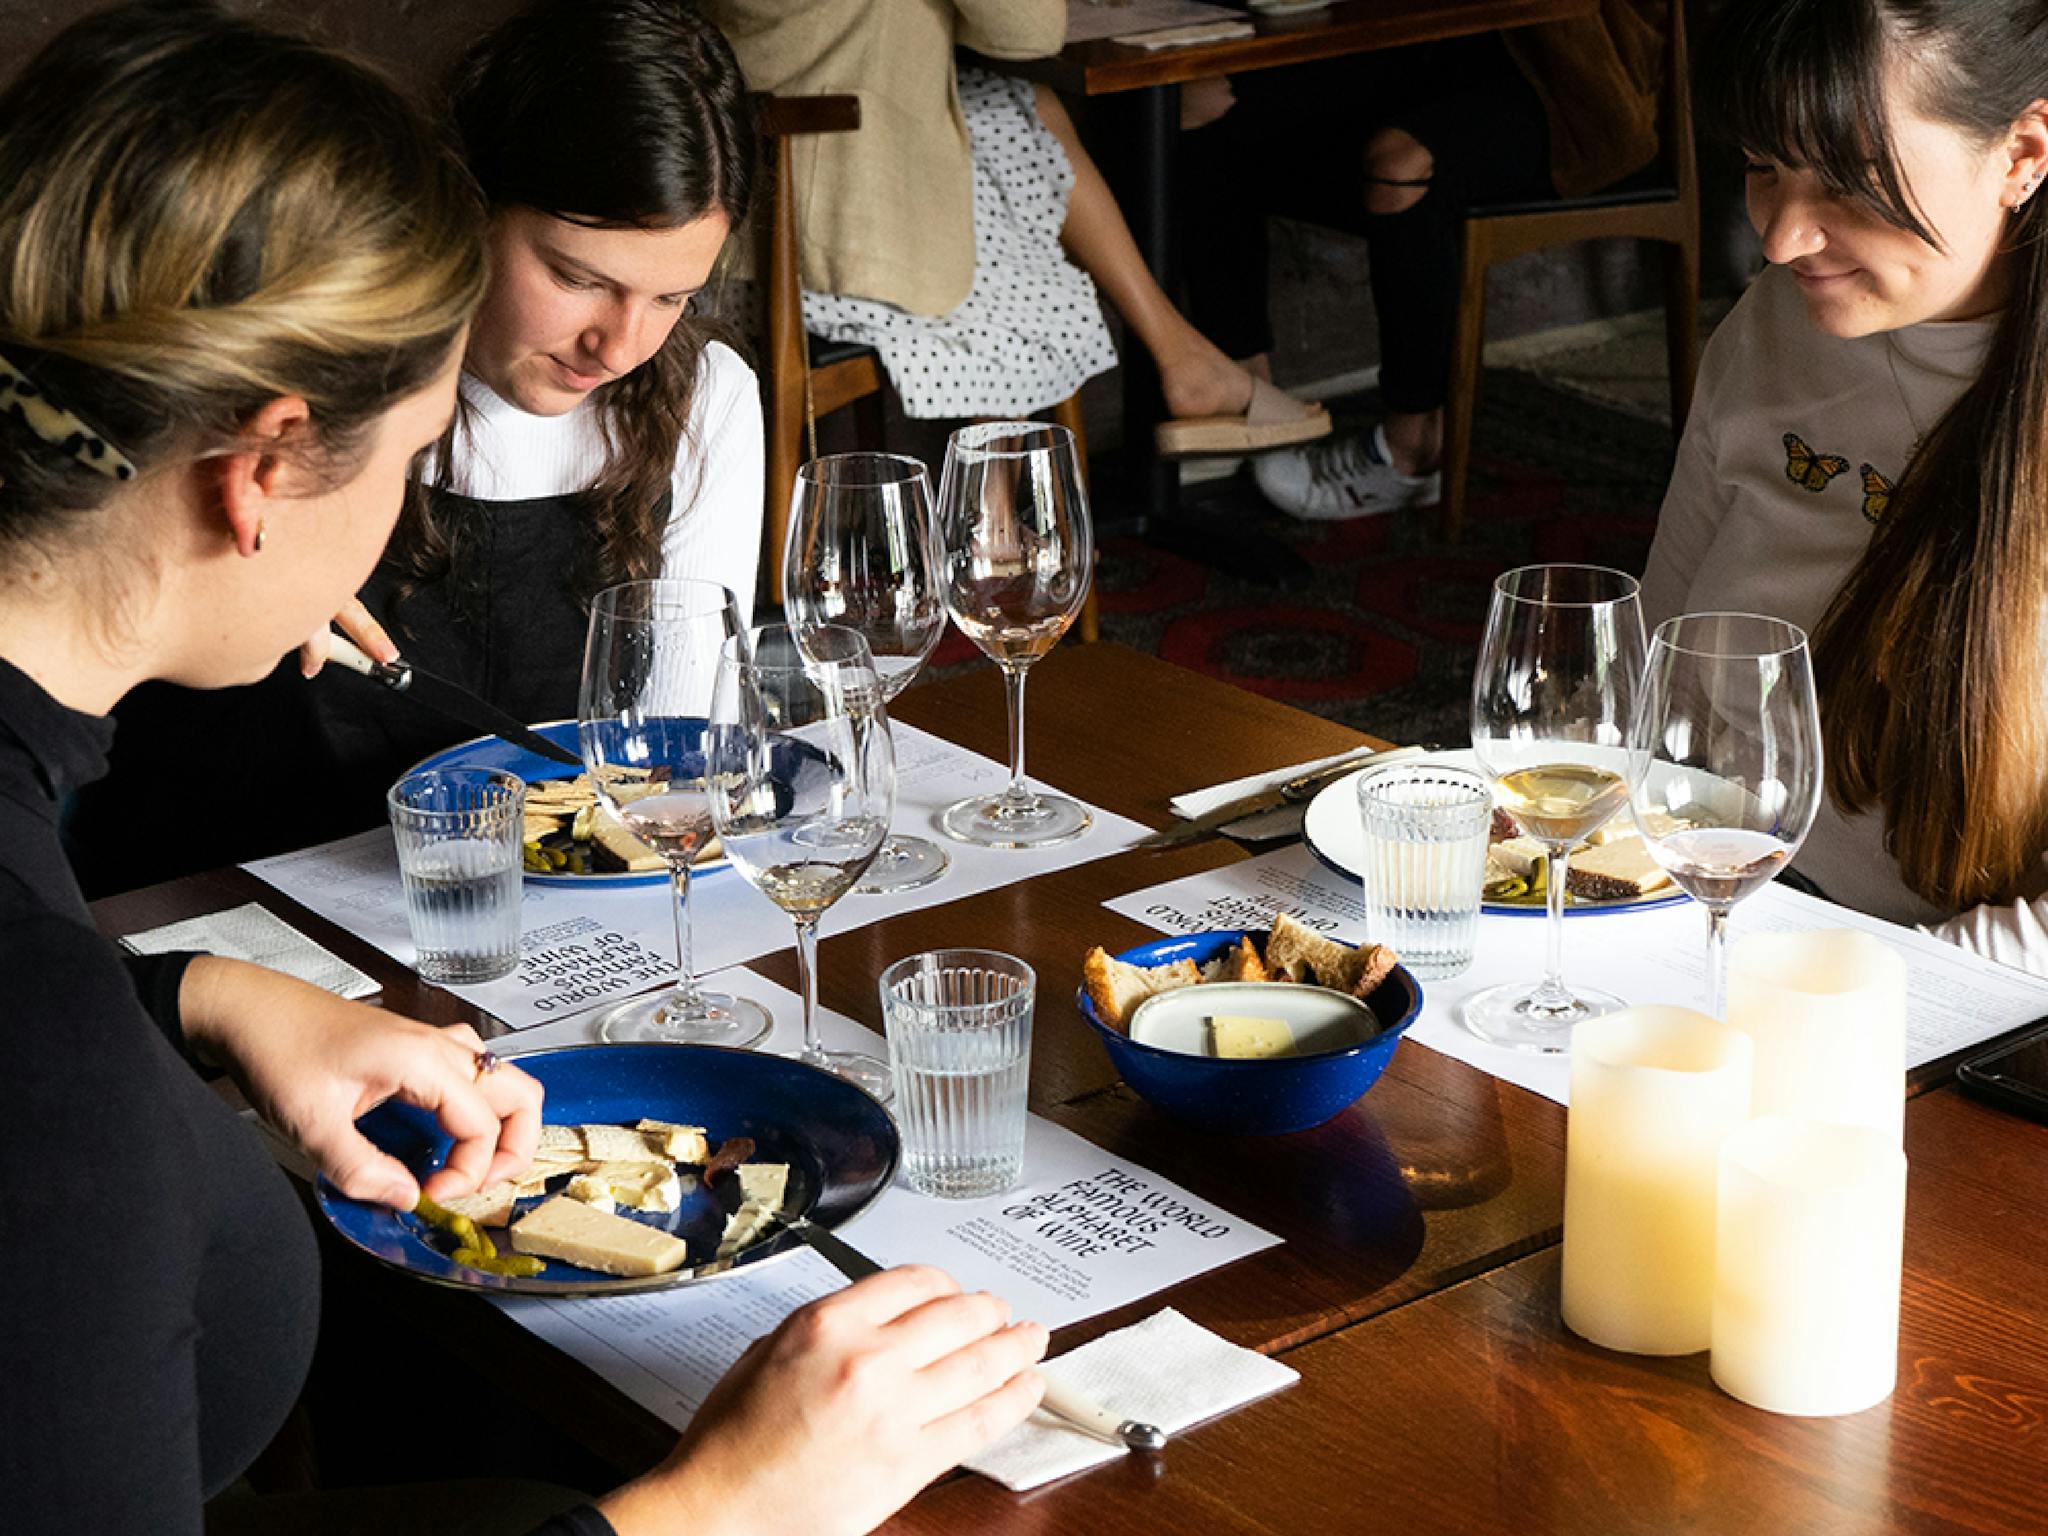 Group of girls sitting at table with wine tasting and cheese plates